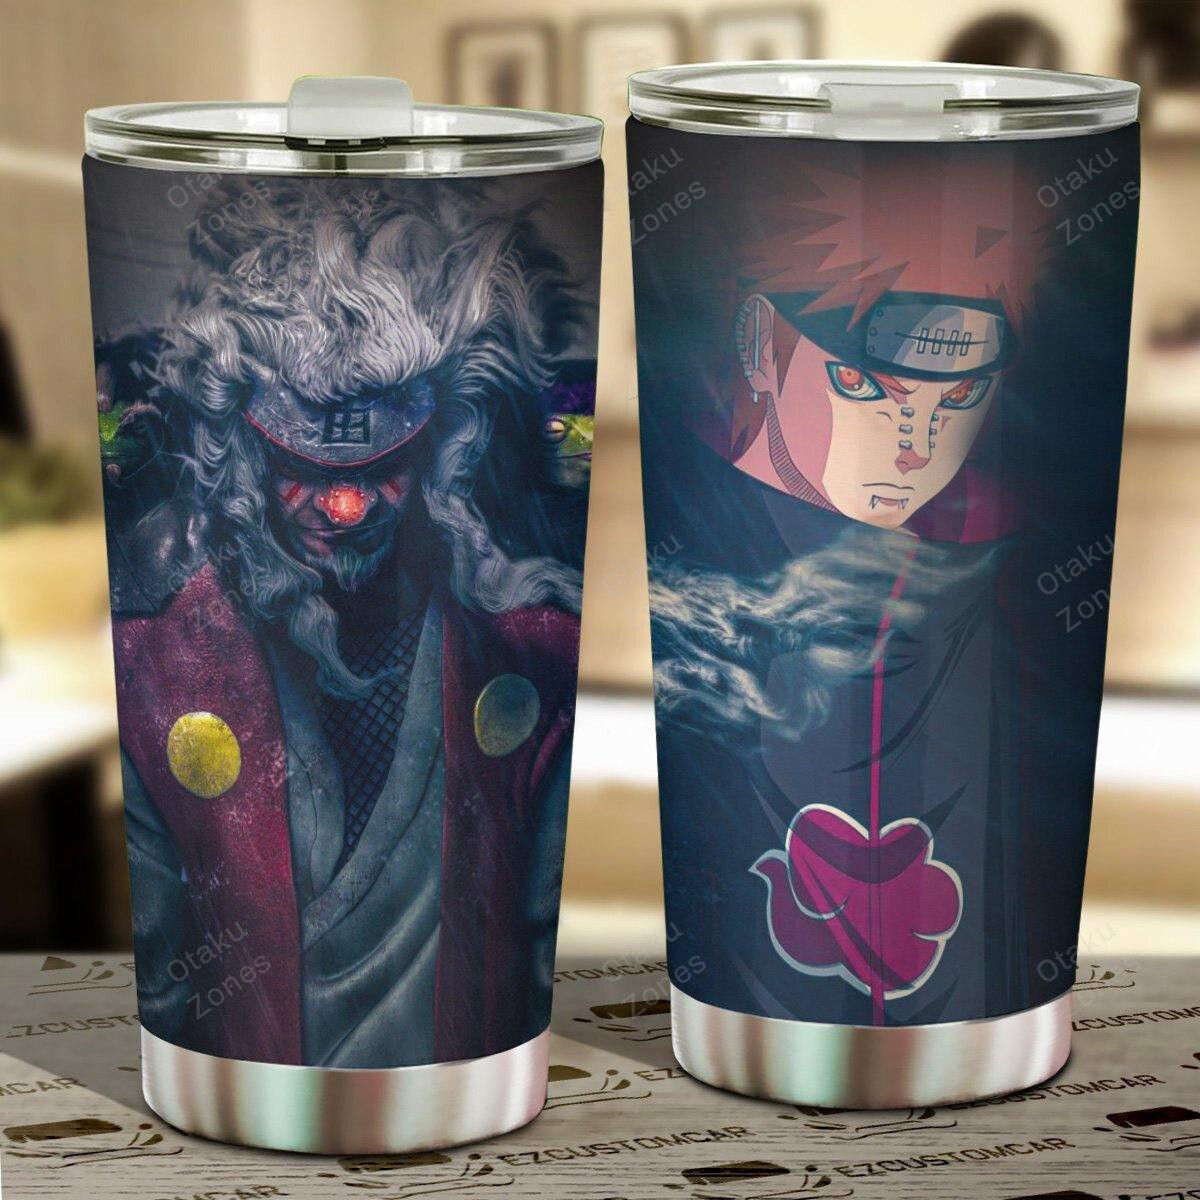 Go ahead and order your new tumbler now! 92